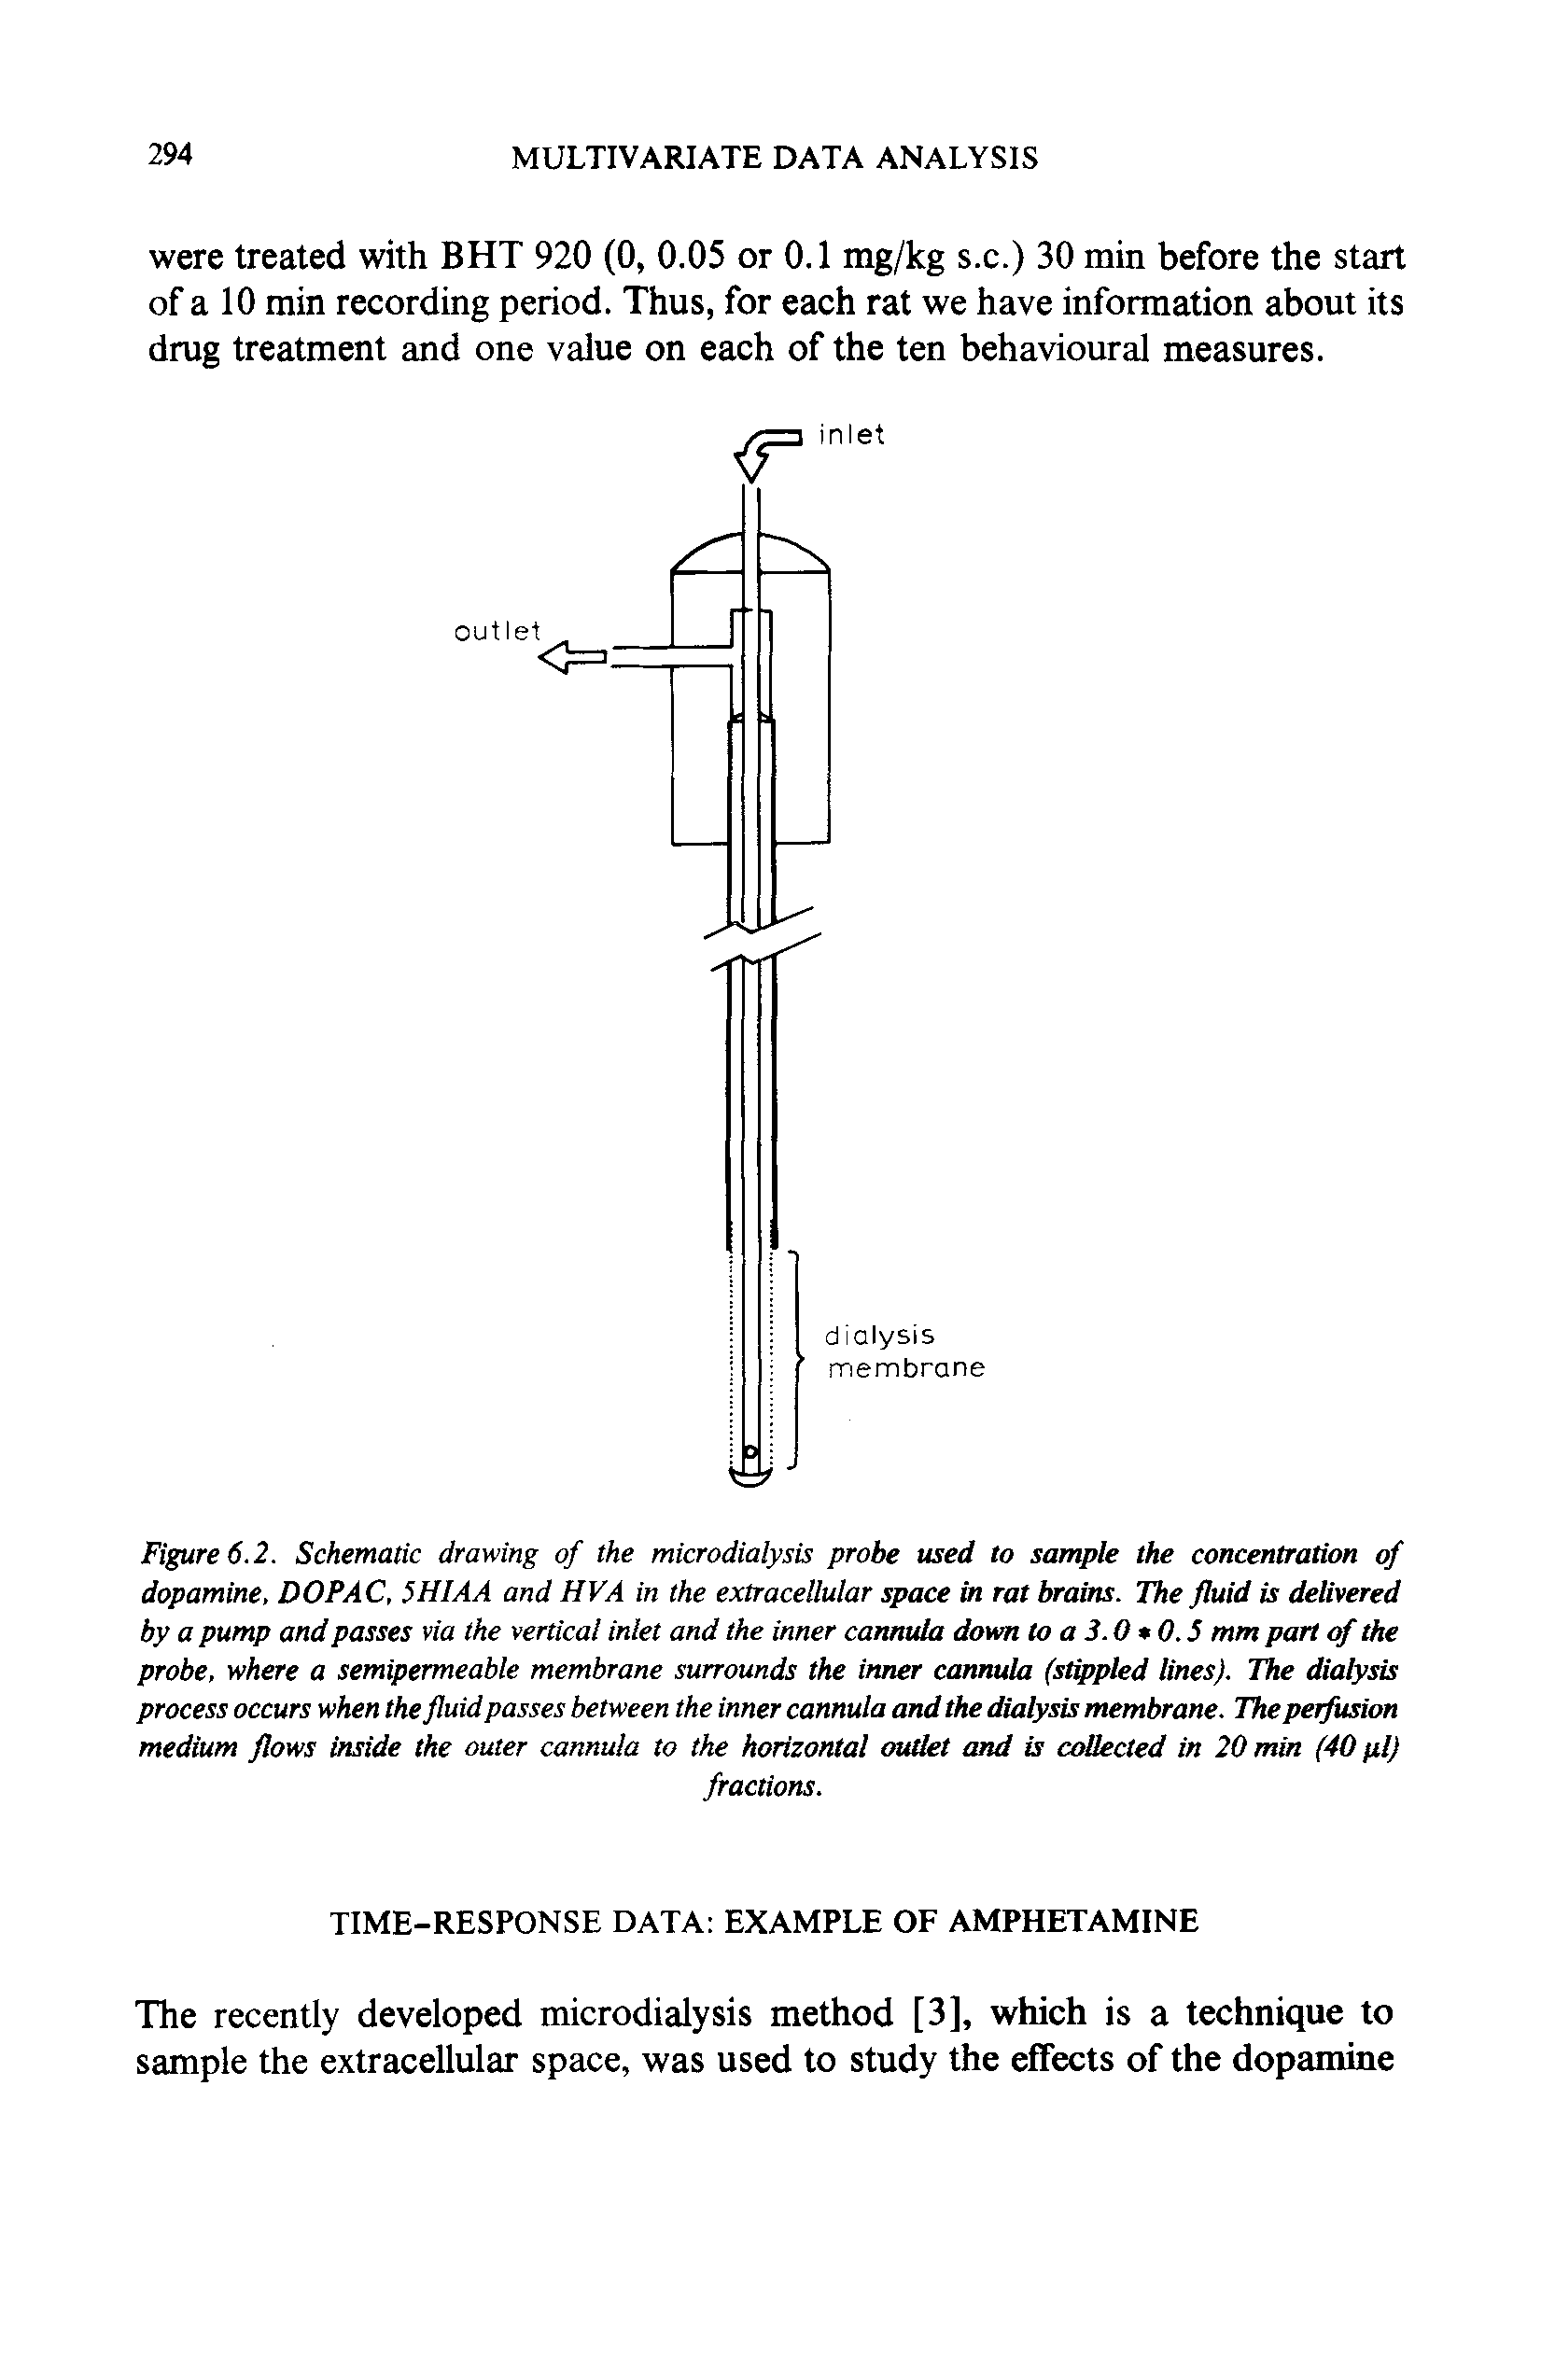 Figure 6.2. Schematic drawing of the microdialysis probe used to sample the concentration of dopamine, DOPAC, 5HIAA and HVA in the extracellular space in rat brains. The fluid is delivered by a pump and passes via the vertical inlet and the inner cannula down to a 3.0 0.5 mm part of the probe, where a semipermeable membrane surrounds the inner cannula (stippled lines). The dialysis process occurs when the fluid passes between the inner cannula and the dialysis membrane. The perfusion medium flows inside the outer cannula to the horizontal outlet and is collected in 20 min (40 pi)...